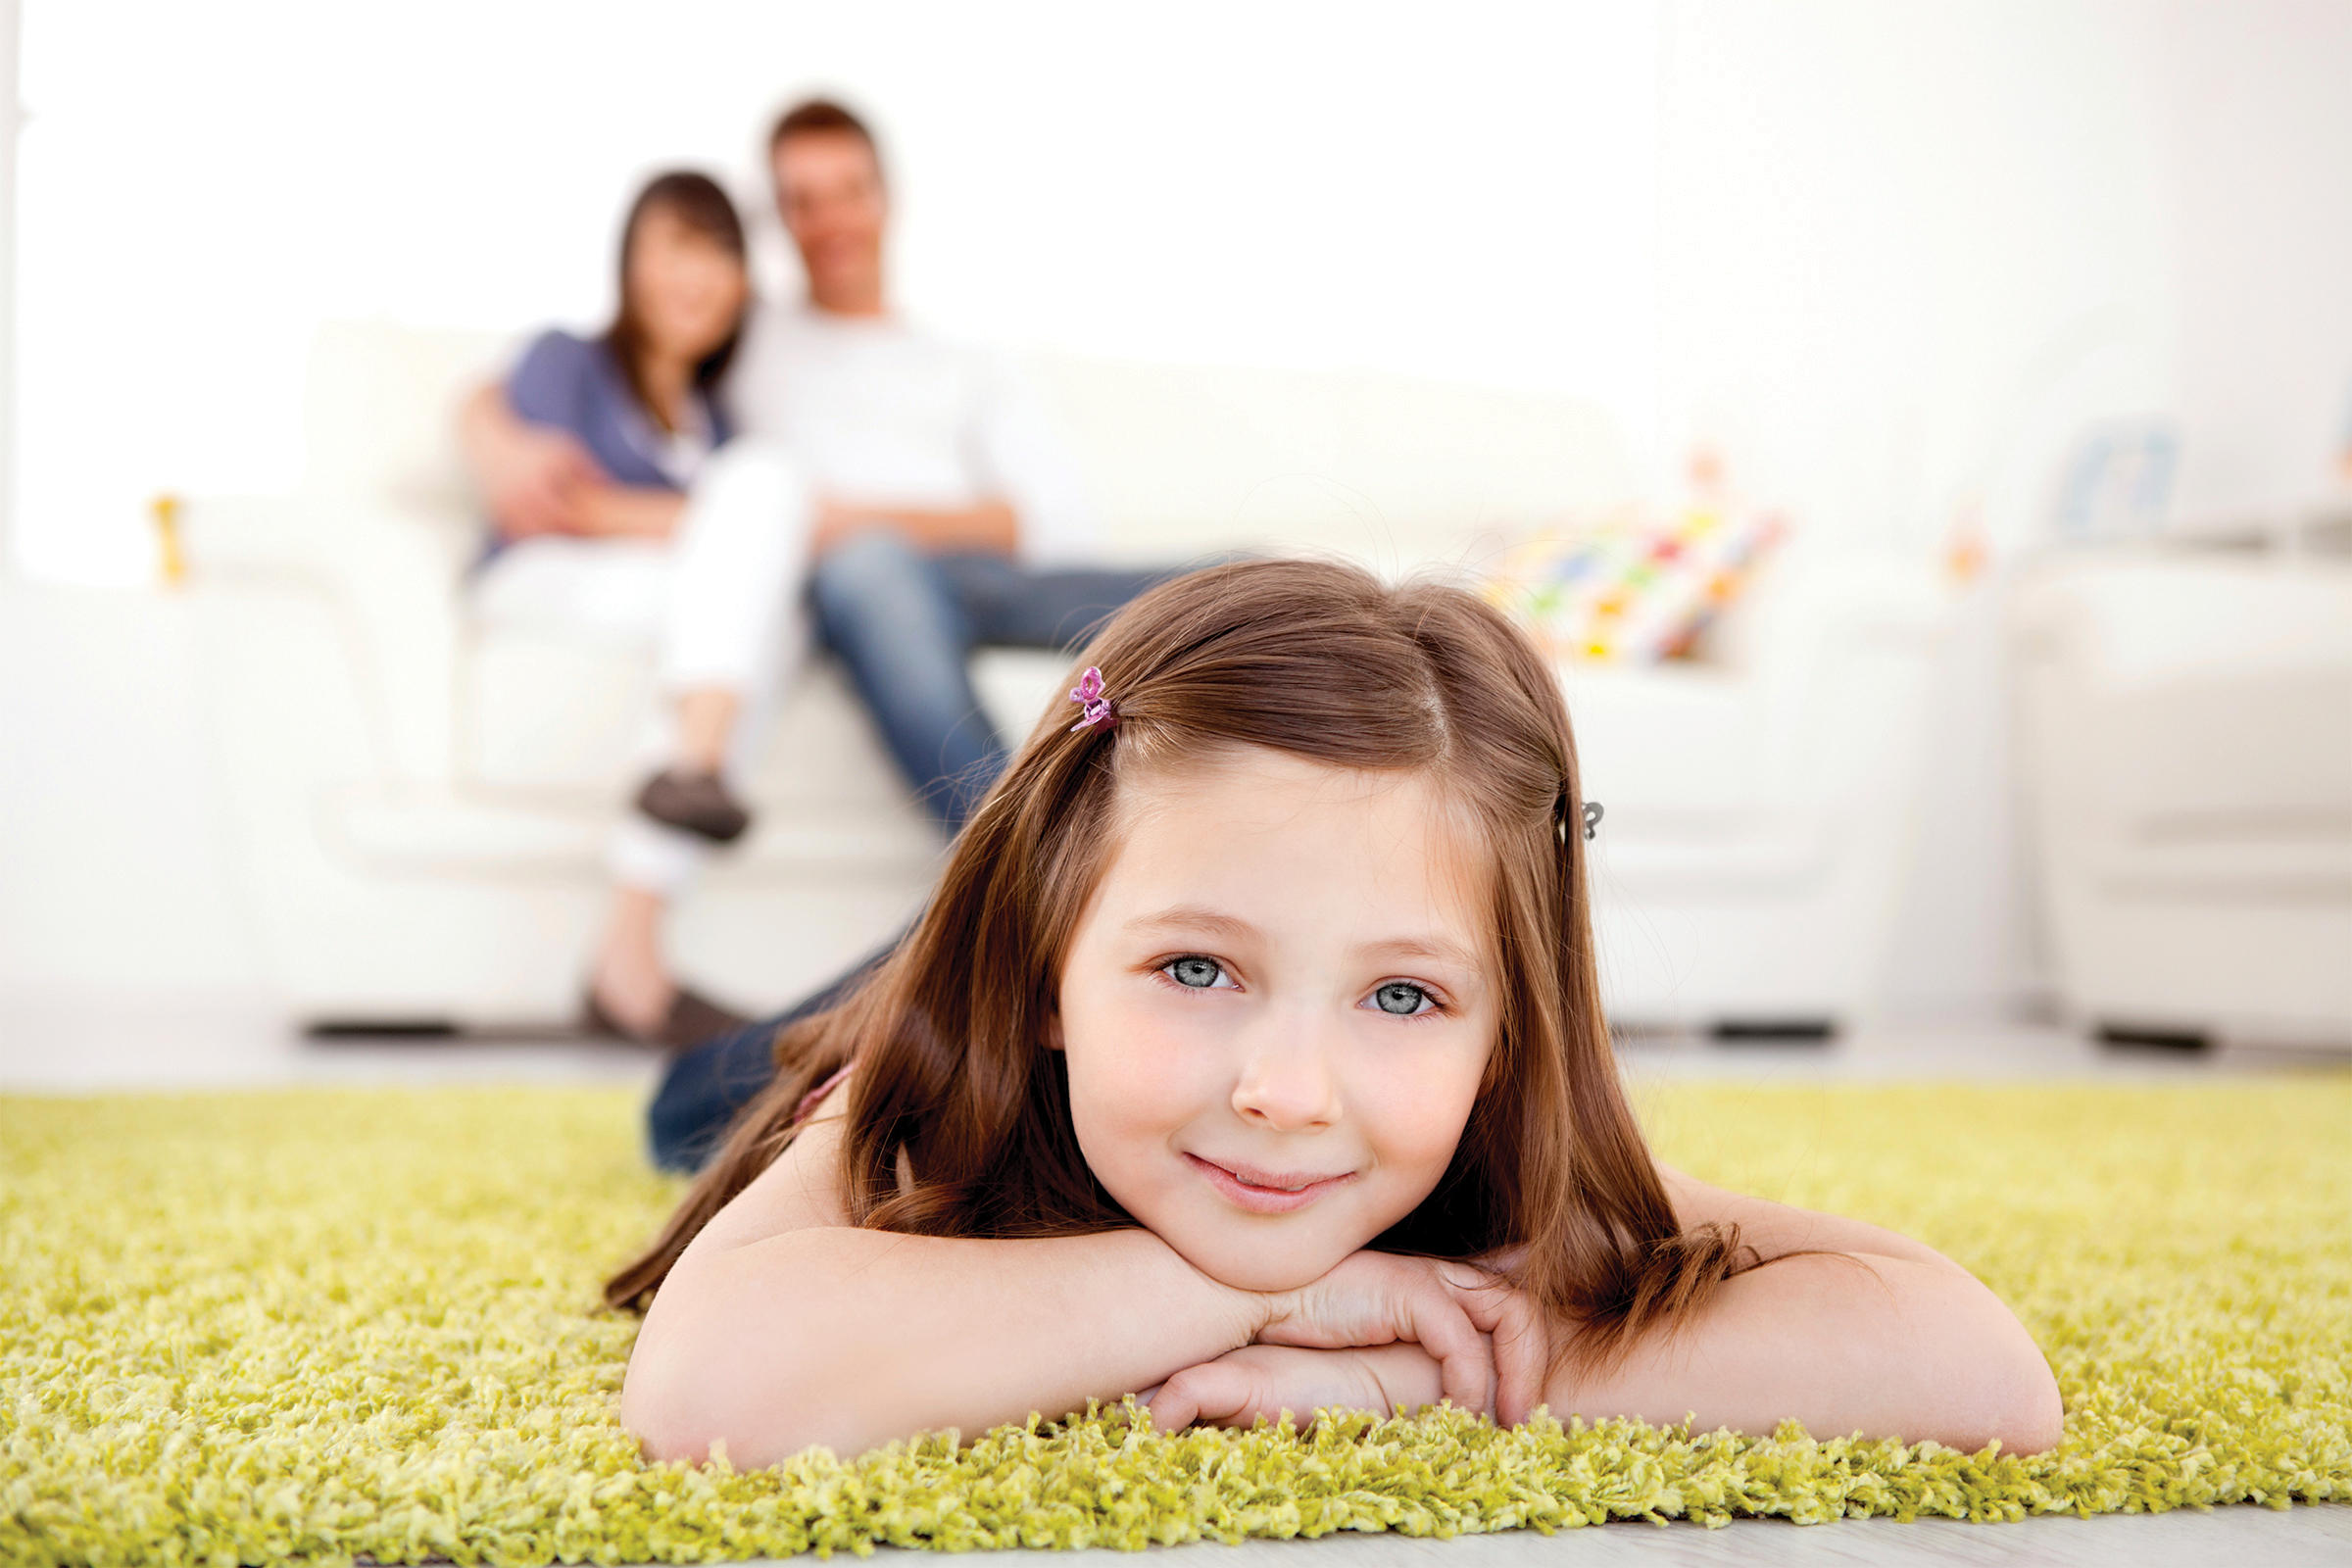 When you're looking for Sheboygan carpet cleaning, you can count on us. We're a professional carpet cleaning service that provides a deeper, longer lasting clean and a healthier home.